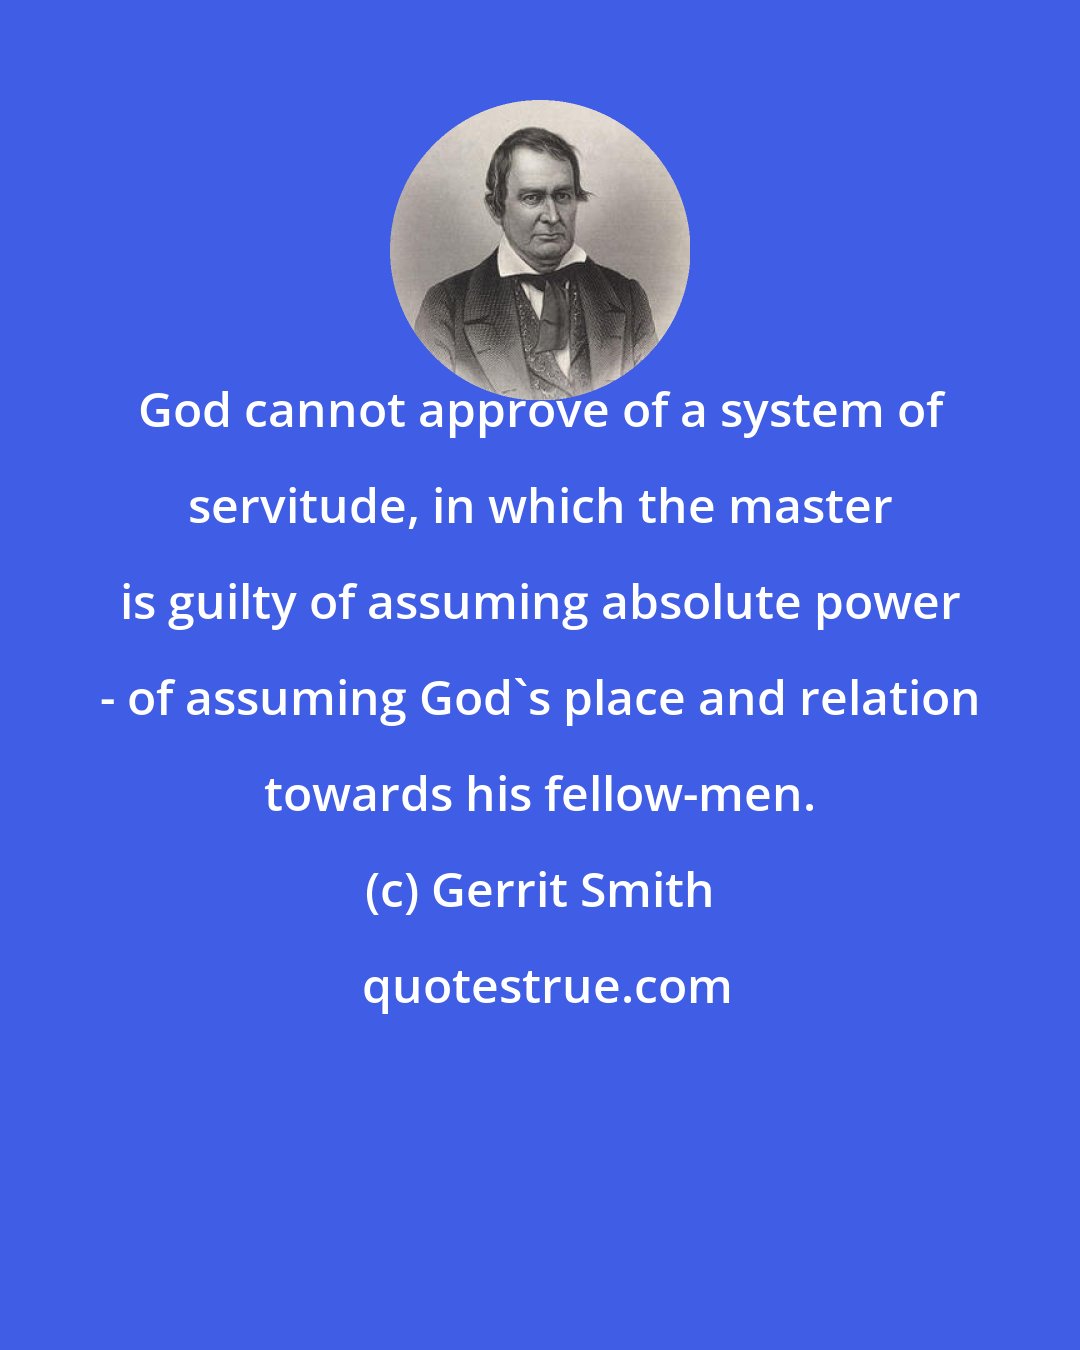 Gerrit Smith: God cannot approve of a system of servitude, in which the master is guilty of assuming absolute power - of assuming God's place and relation towards his fellow-men.